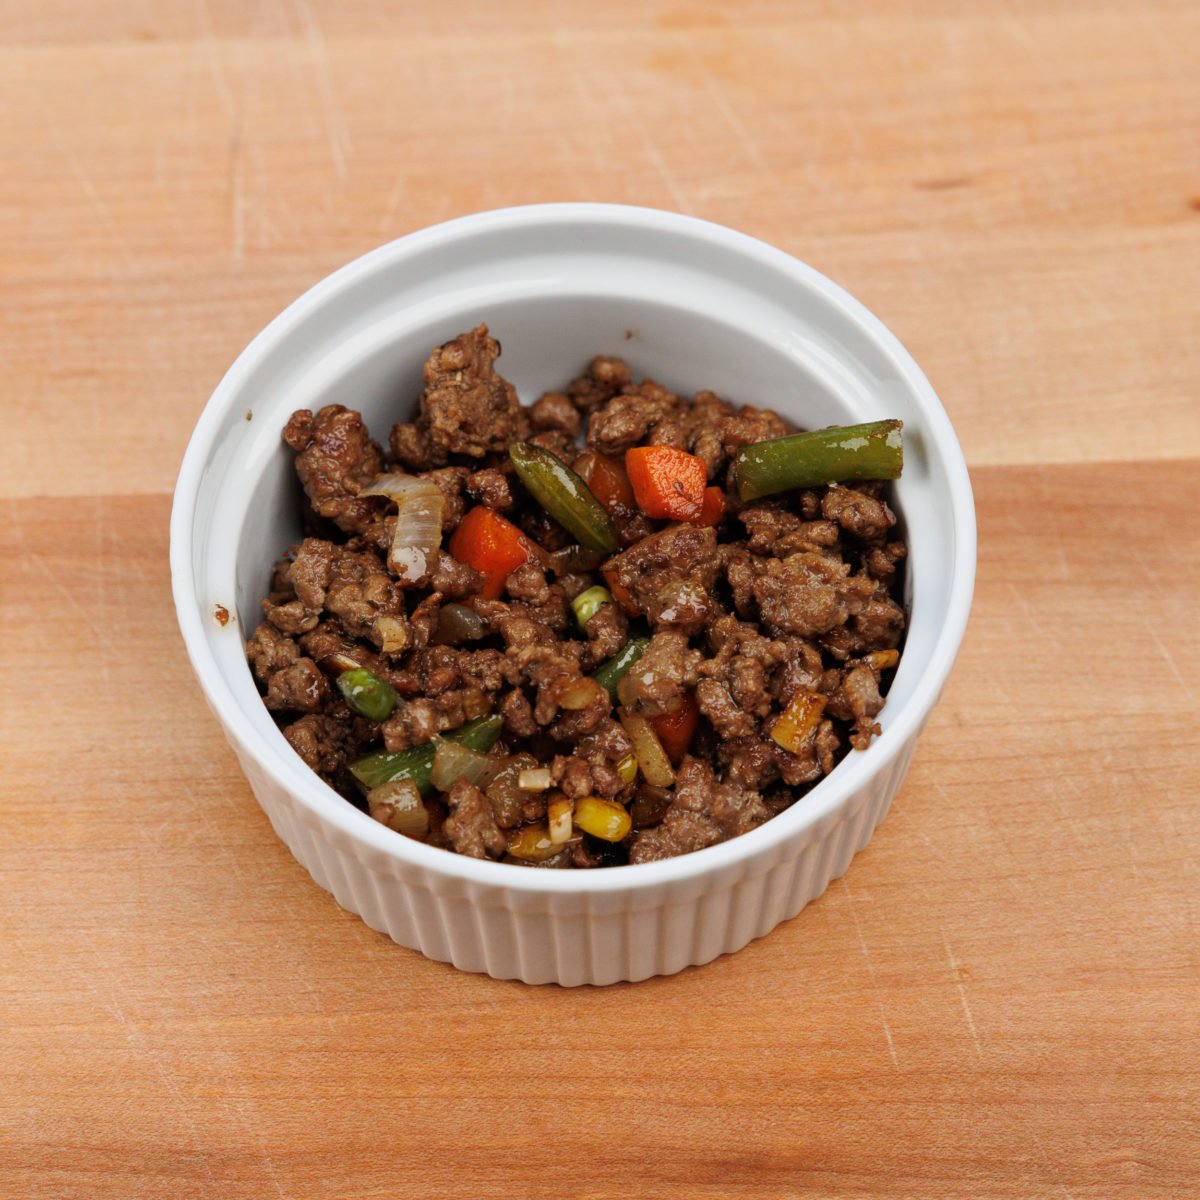 ground lamb and vegetables in a small ramekin.